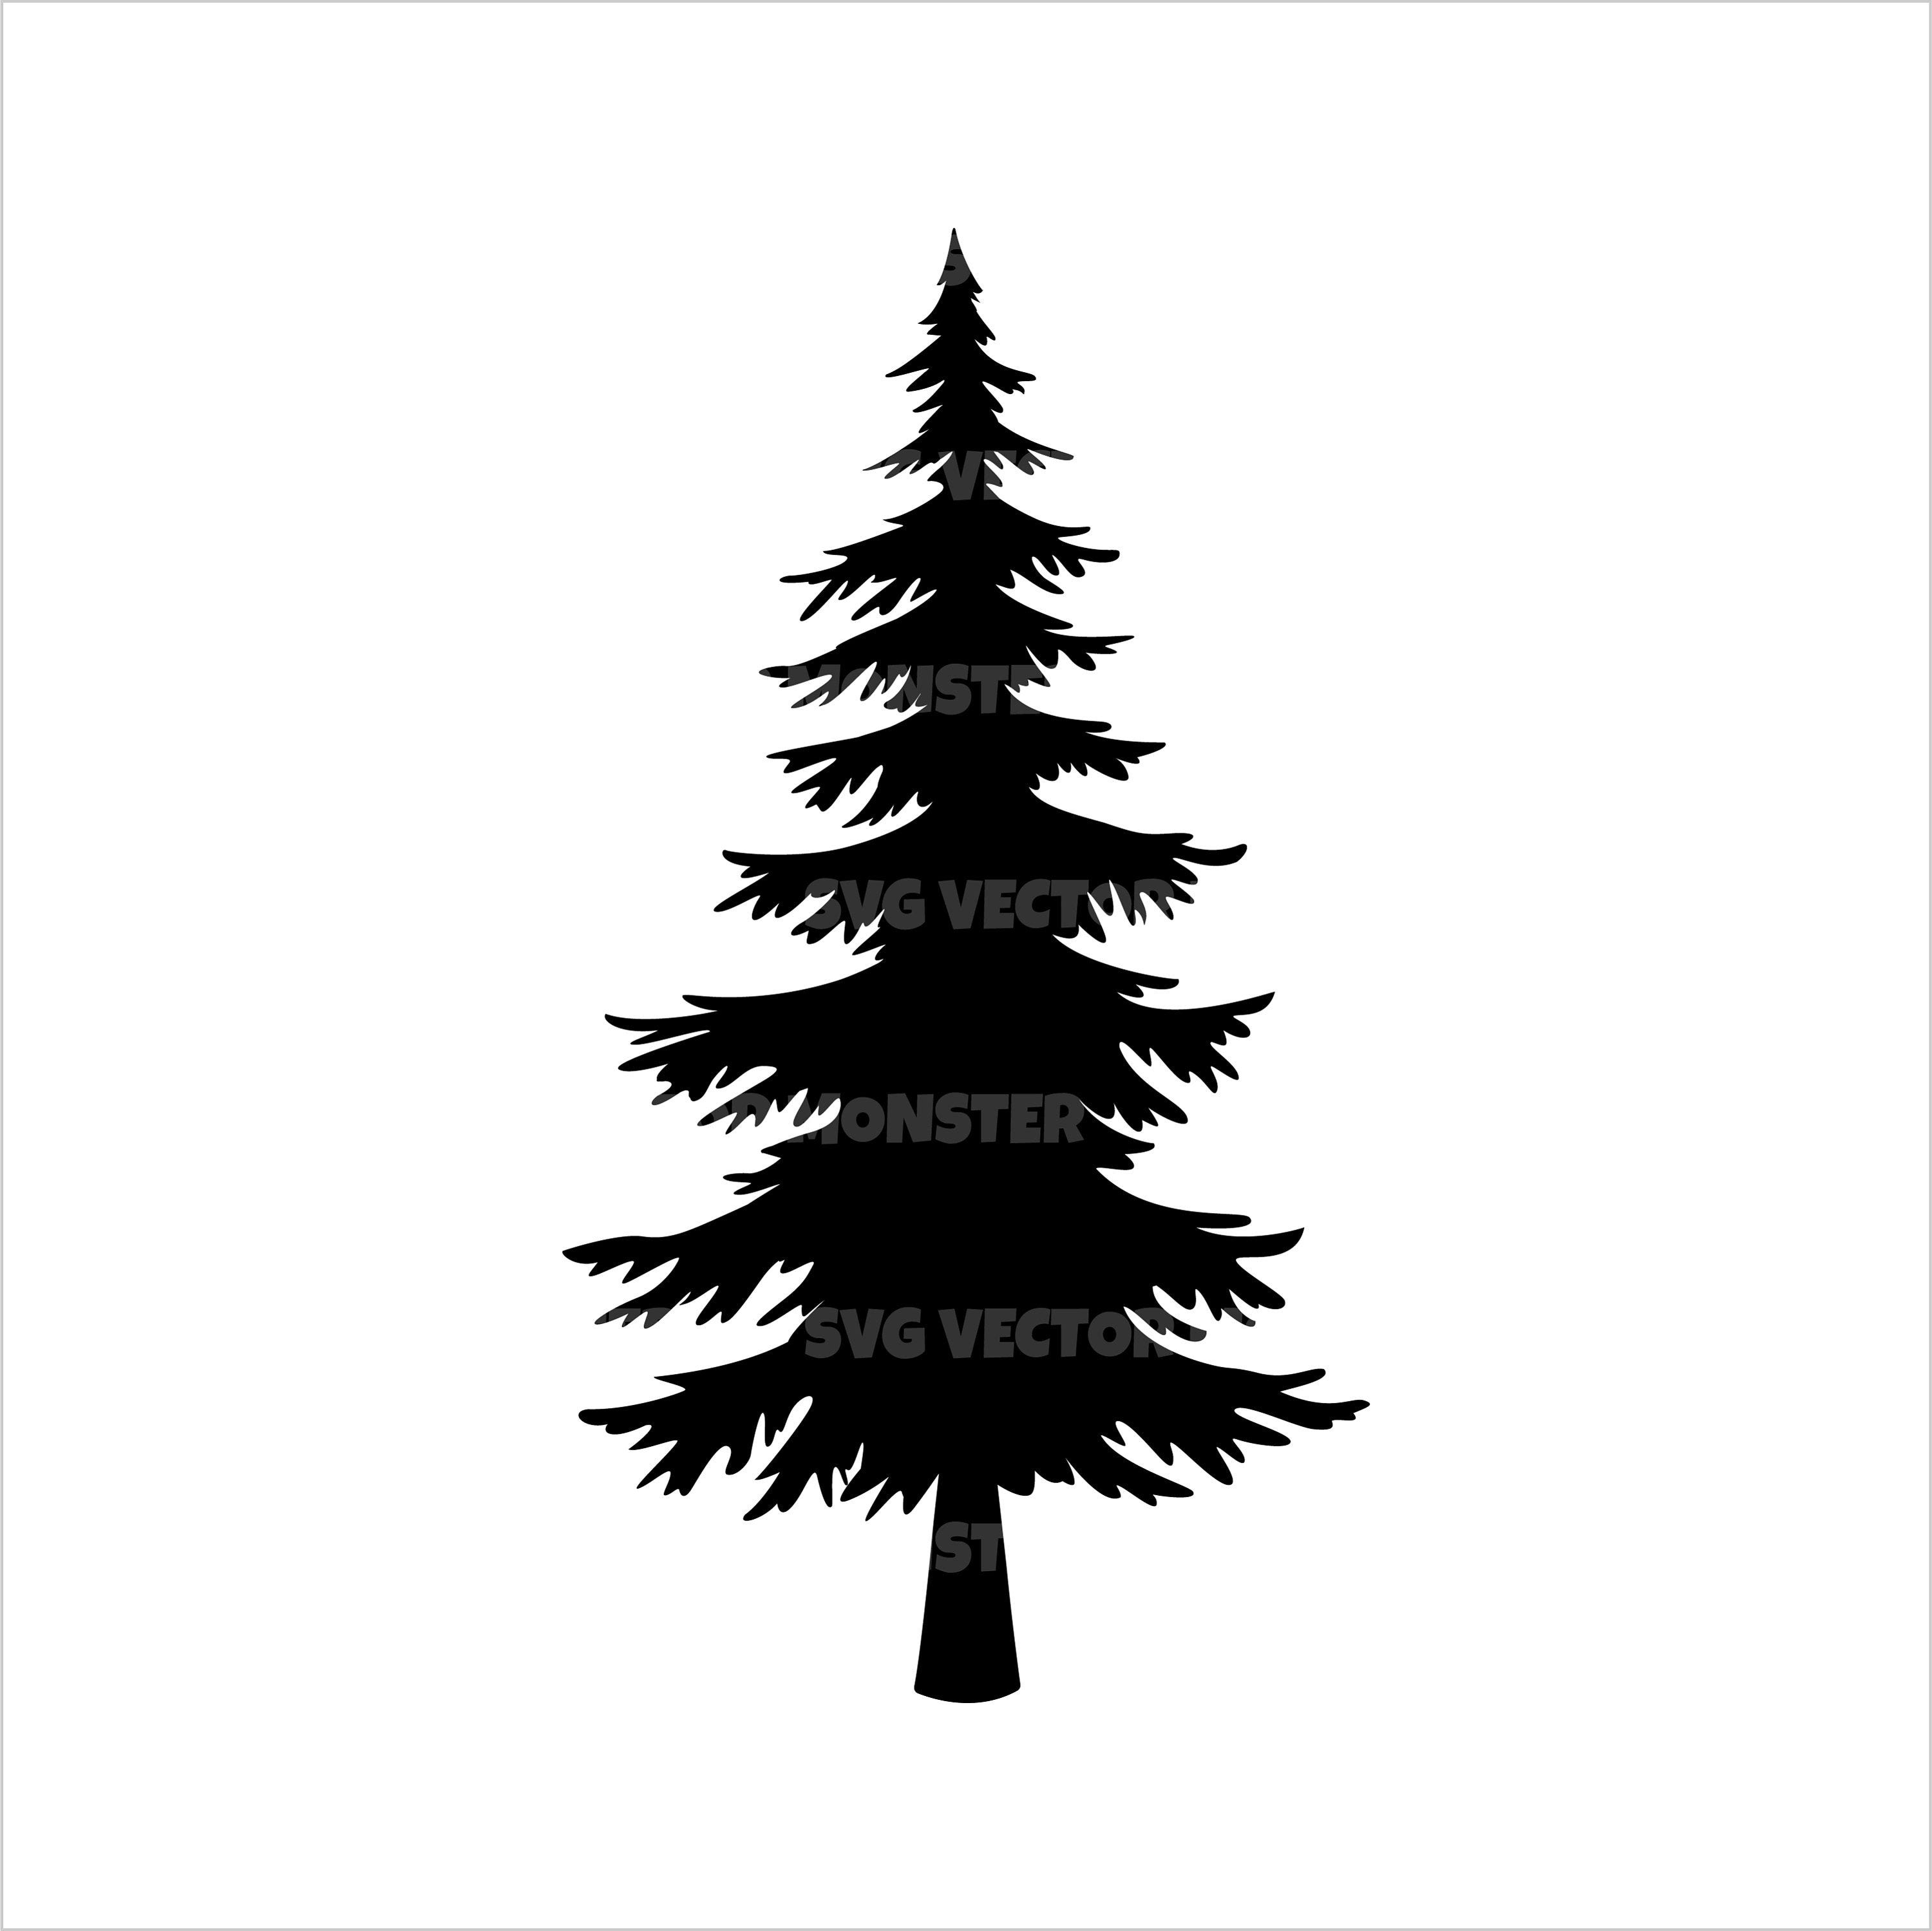 Tree Svg, Pine Tree Svg, Christmas Tree Svg, Vector Cut file for Cricut, Silhouette, Pdf Png Eps Dxf, Decal, Sticker, Vinyl, Pin